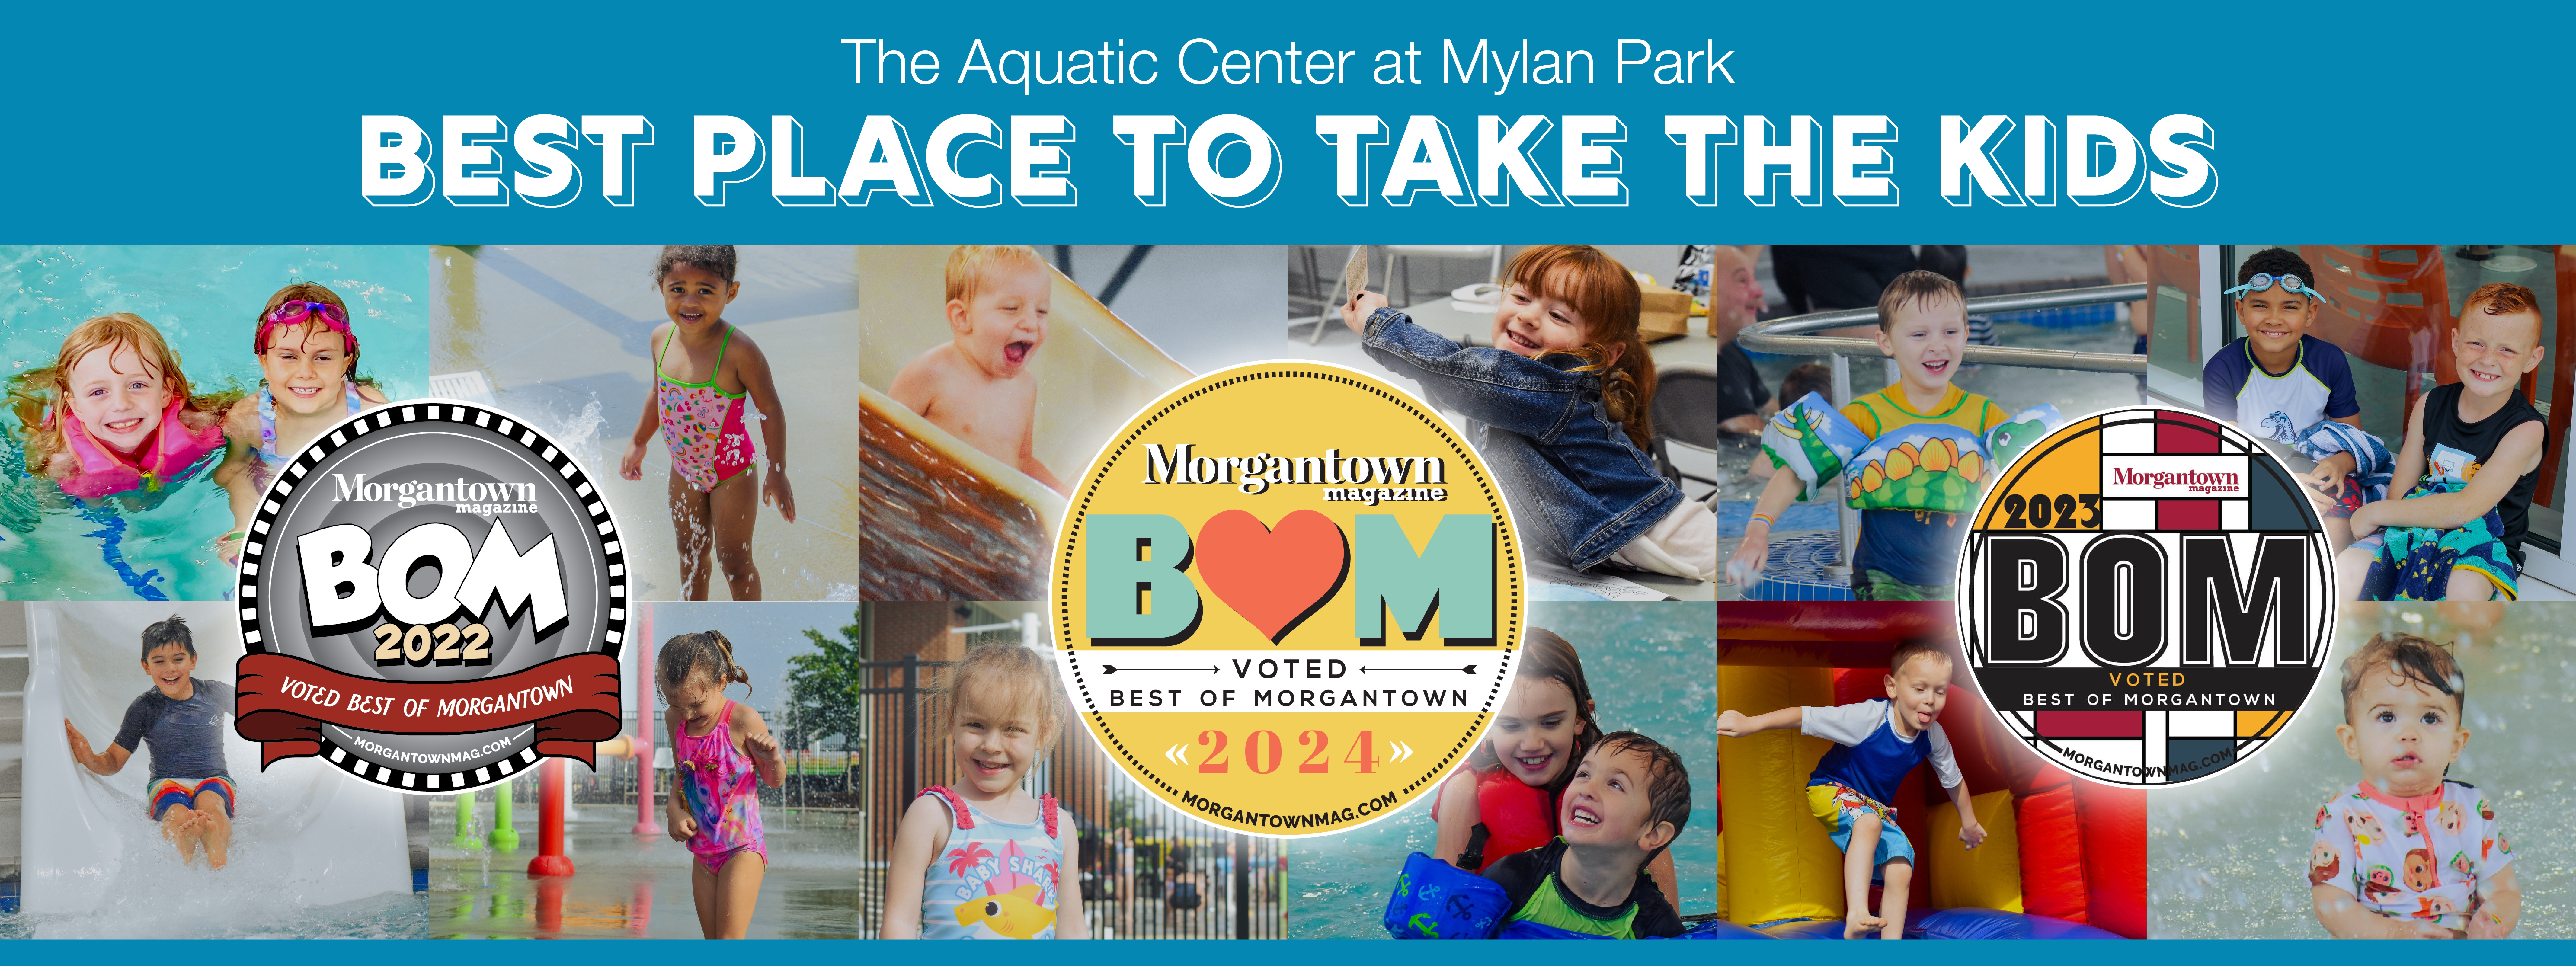 The Aquatic Center at Mylan Park voted The Best Place to Take the Kids in Morgantown, WV for 2022, 2023, and 2024